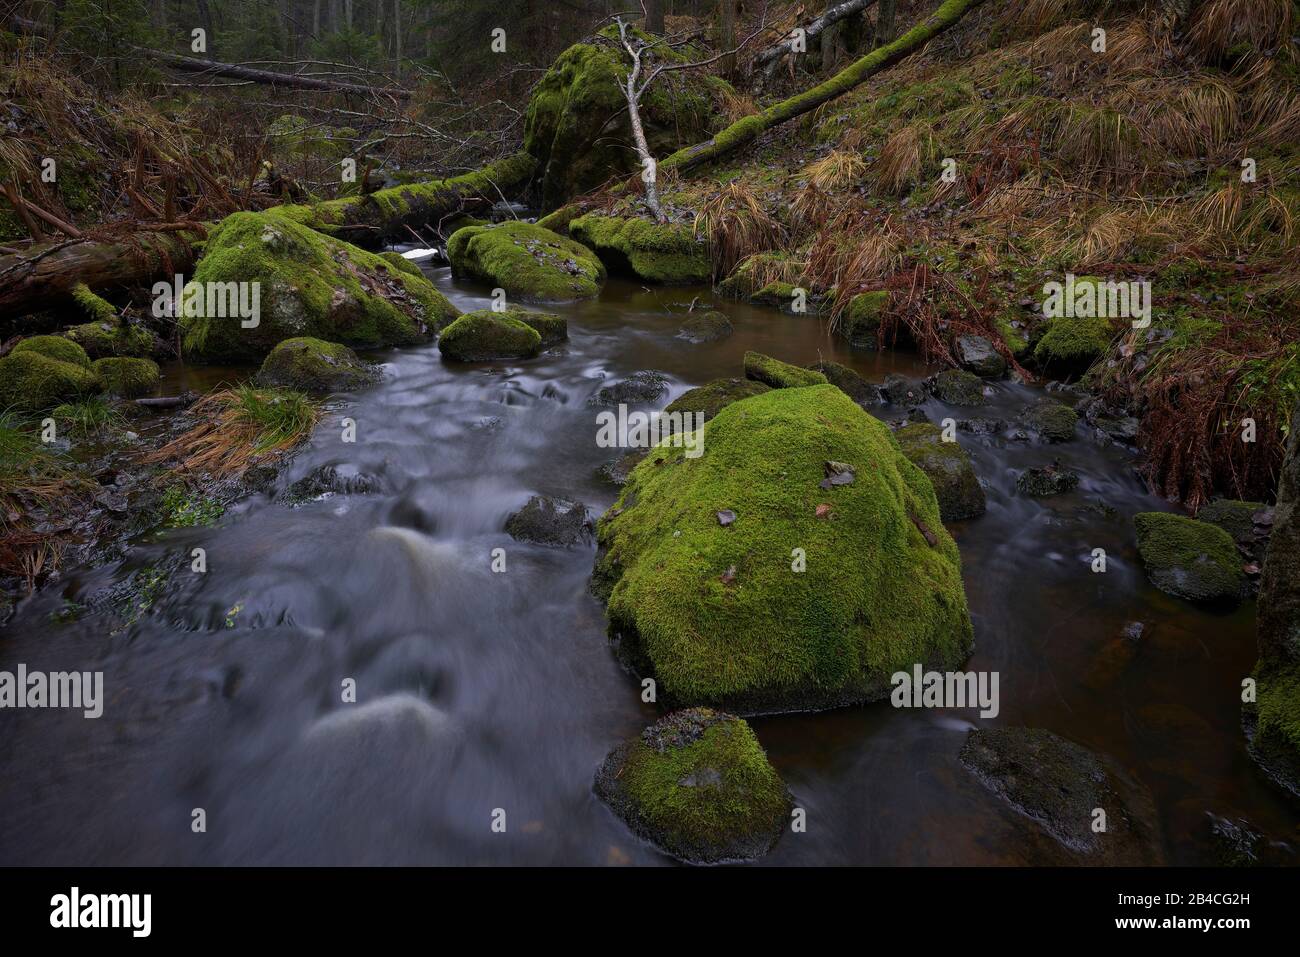 Sweden,södermanland,Tullinge,Forest creek with moss covered stones,autumn Stock Photo